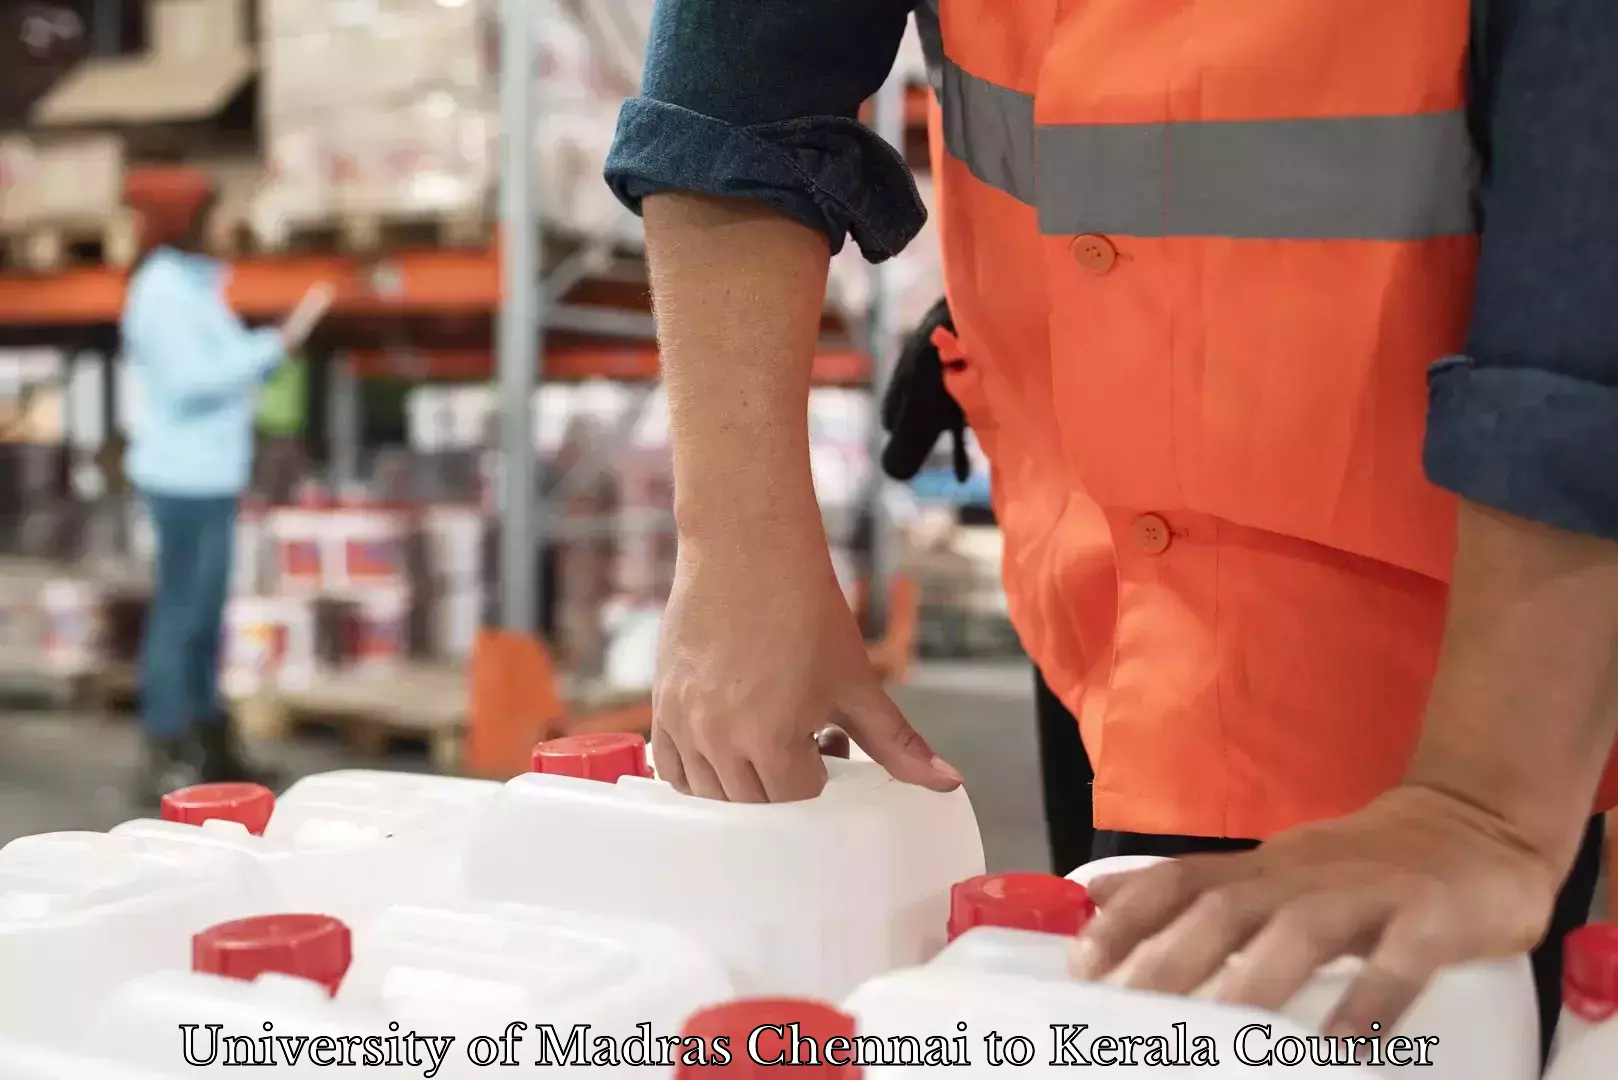 Efficient packing and moving University of Madras Chennai to Kerala